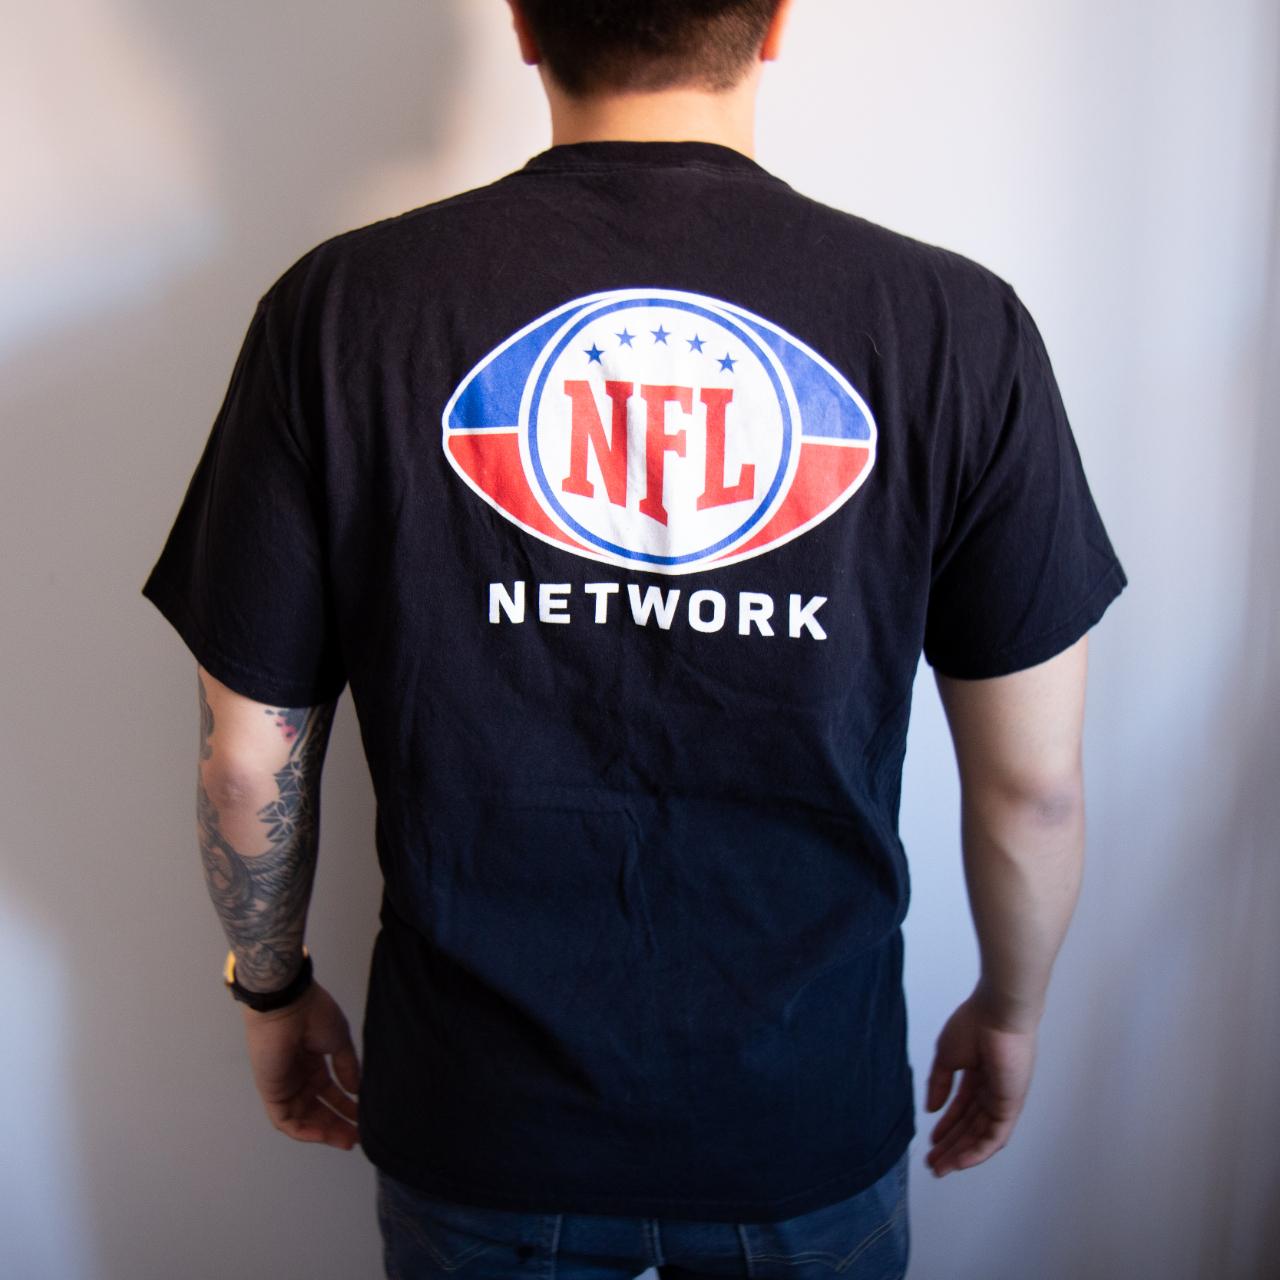 NFL network shirt FREE NEXT DAY SHIPPING 